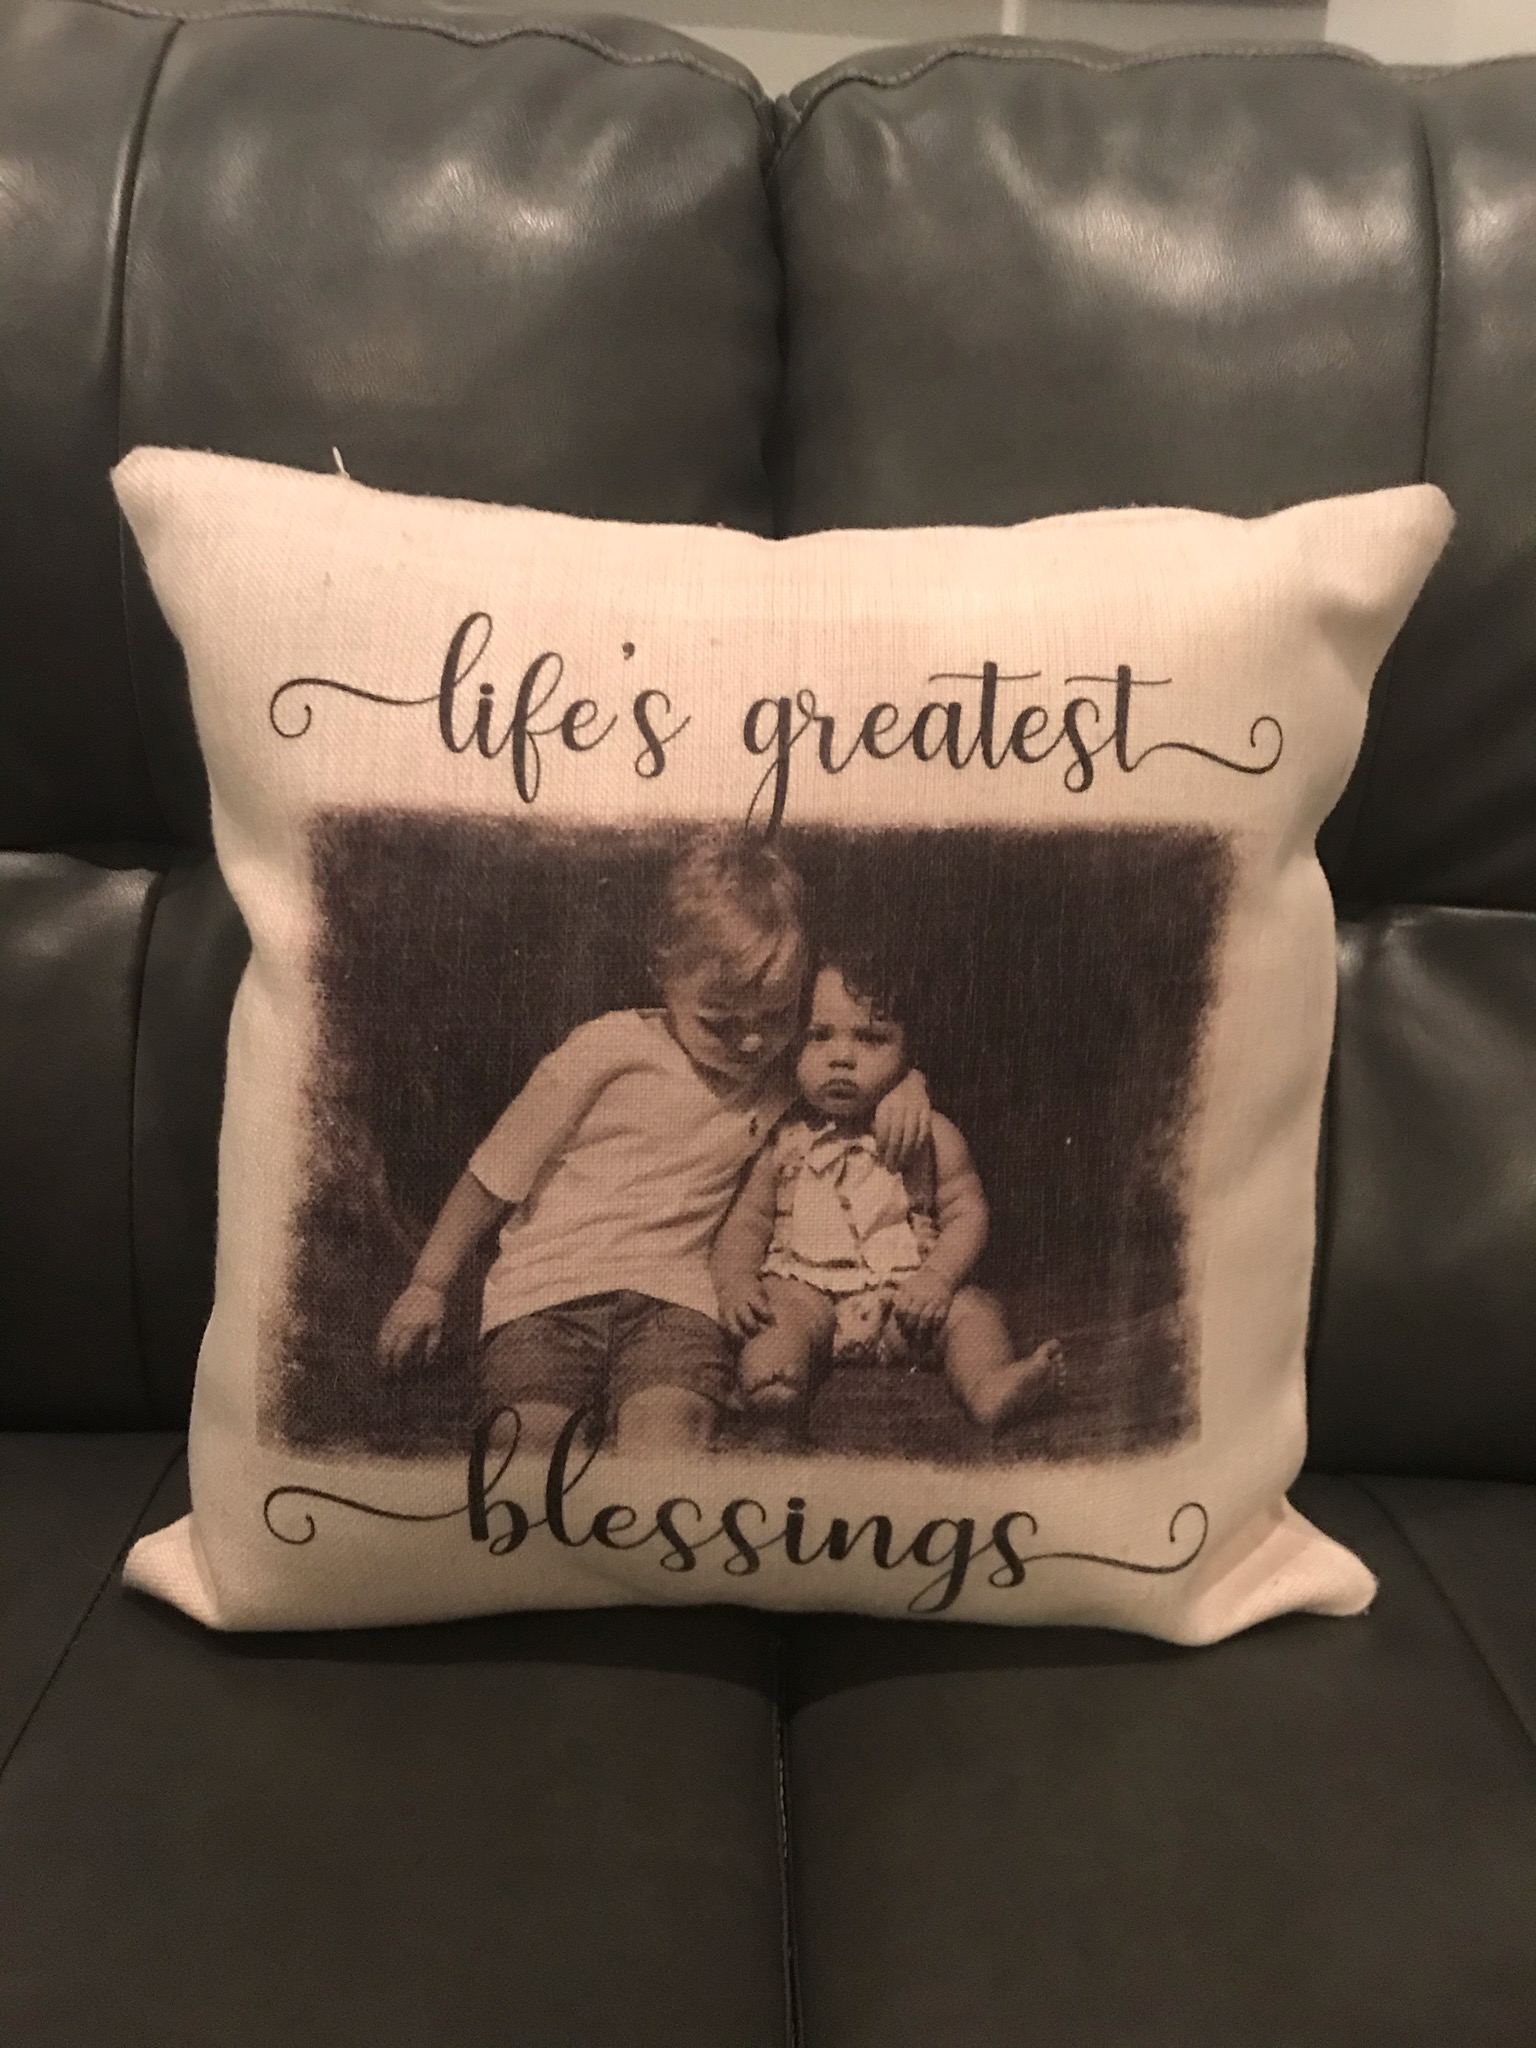 I took a photo of my grand babies and sublimated it on the pillow with some edge effects and ad